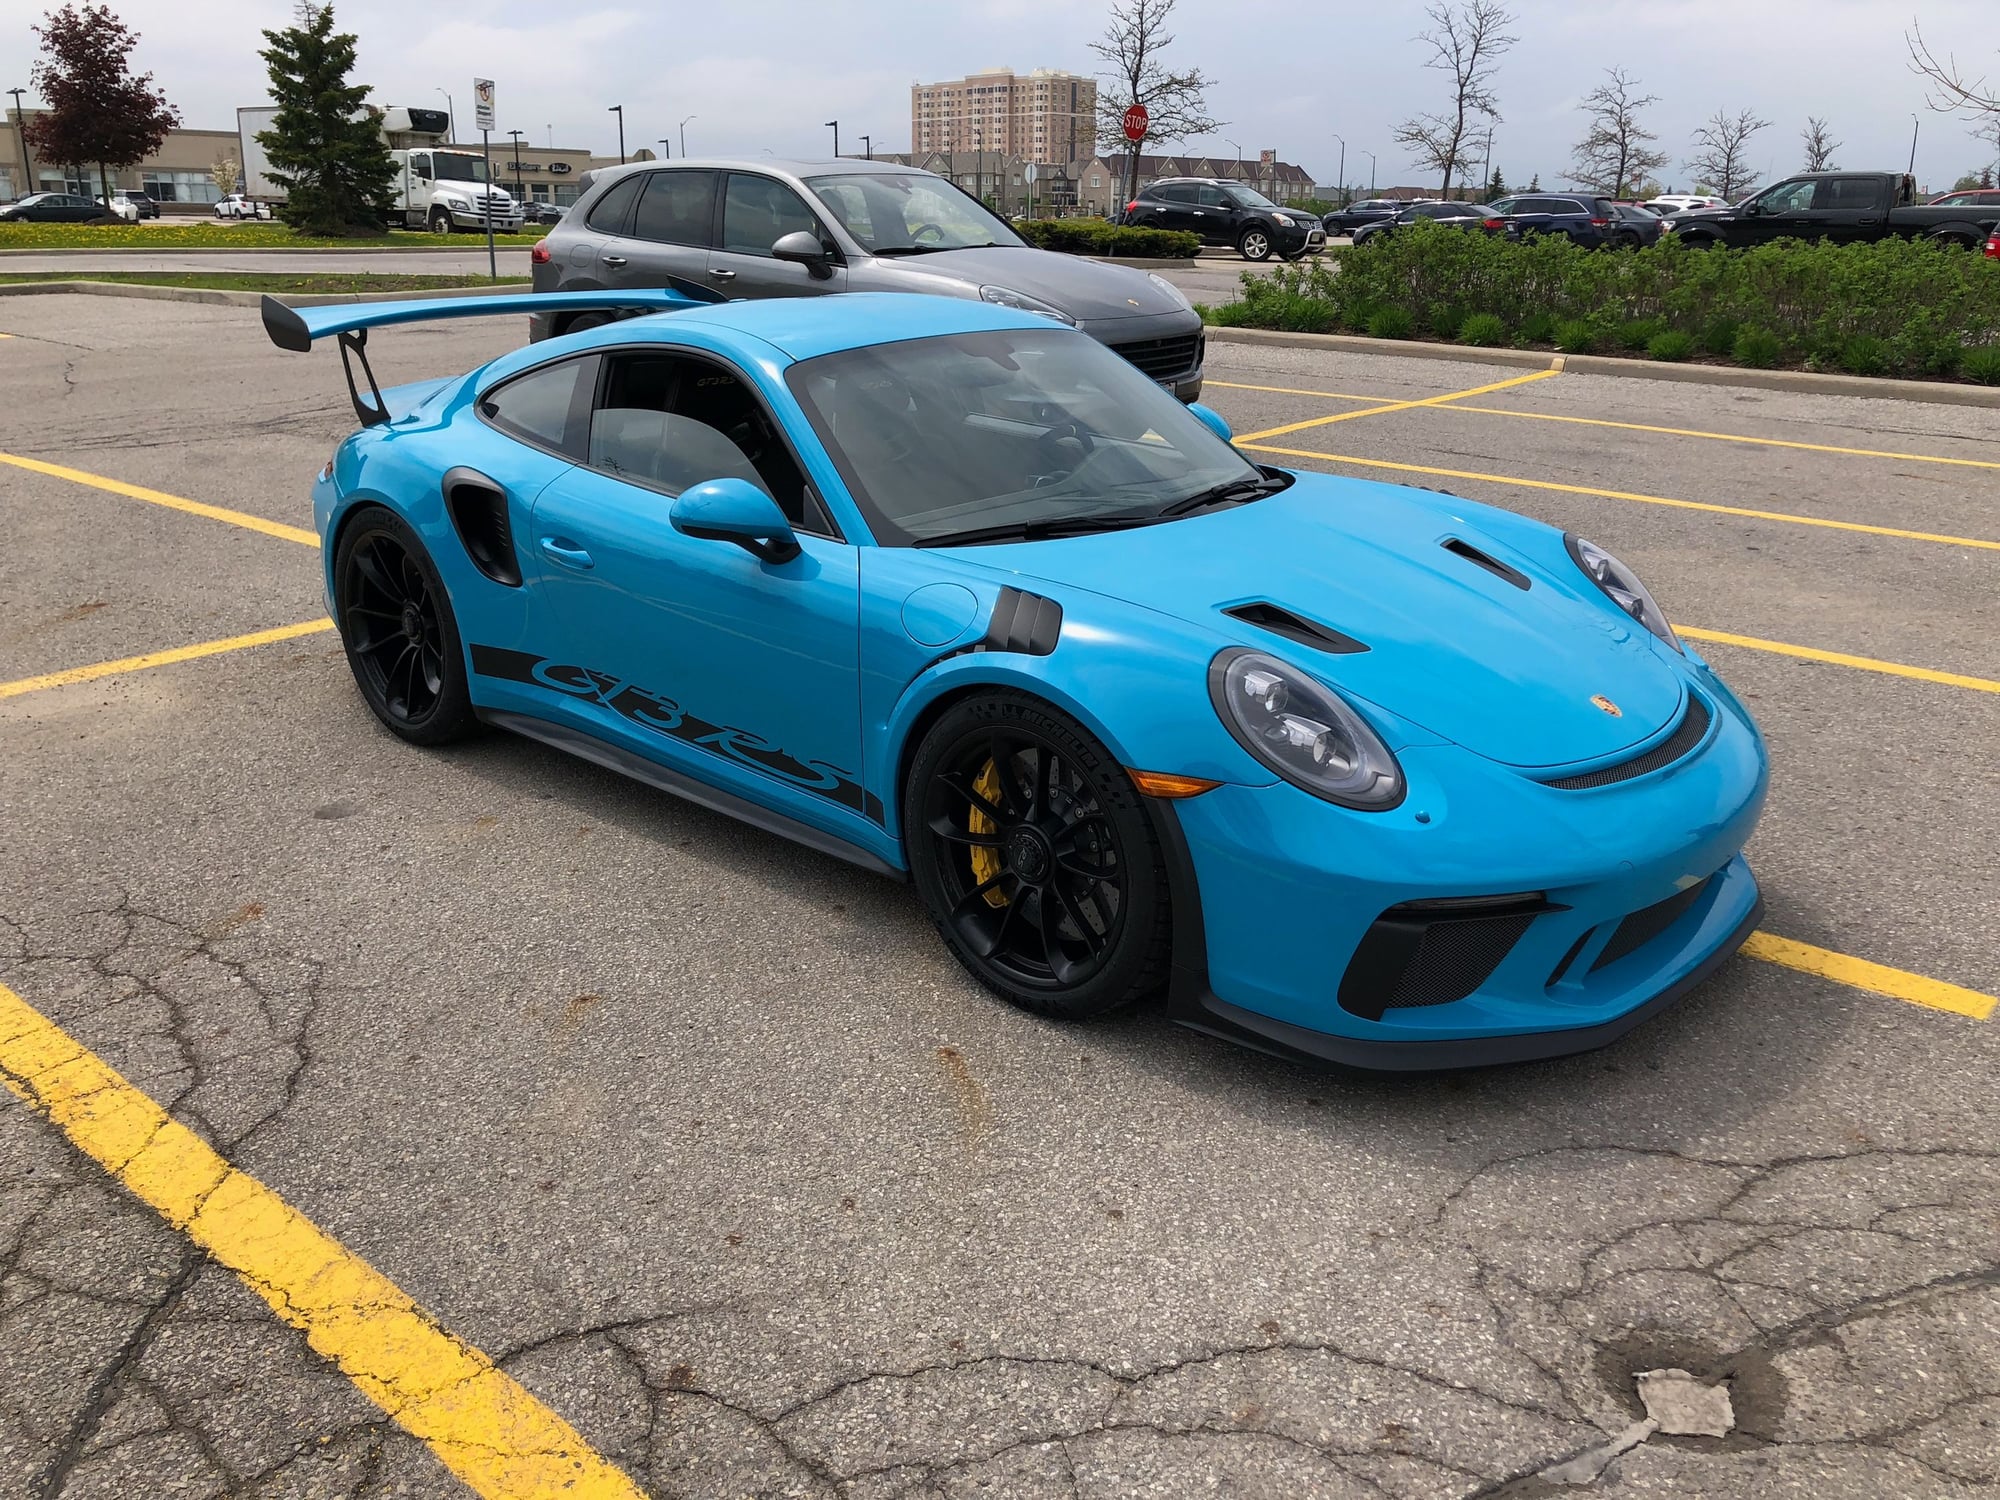 2019 Porsche GT3 - FS: 2019 911 GT3RS Miami Blue - New - VIN WP0AF2A97KS166776 - 100 Miles - 6 cyl - 2WD - Automatic - Coupe - Blue - Toronto, ON M5A1V2, Canada